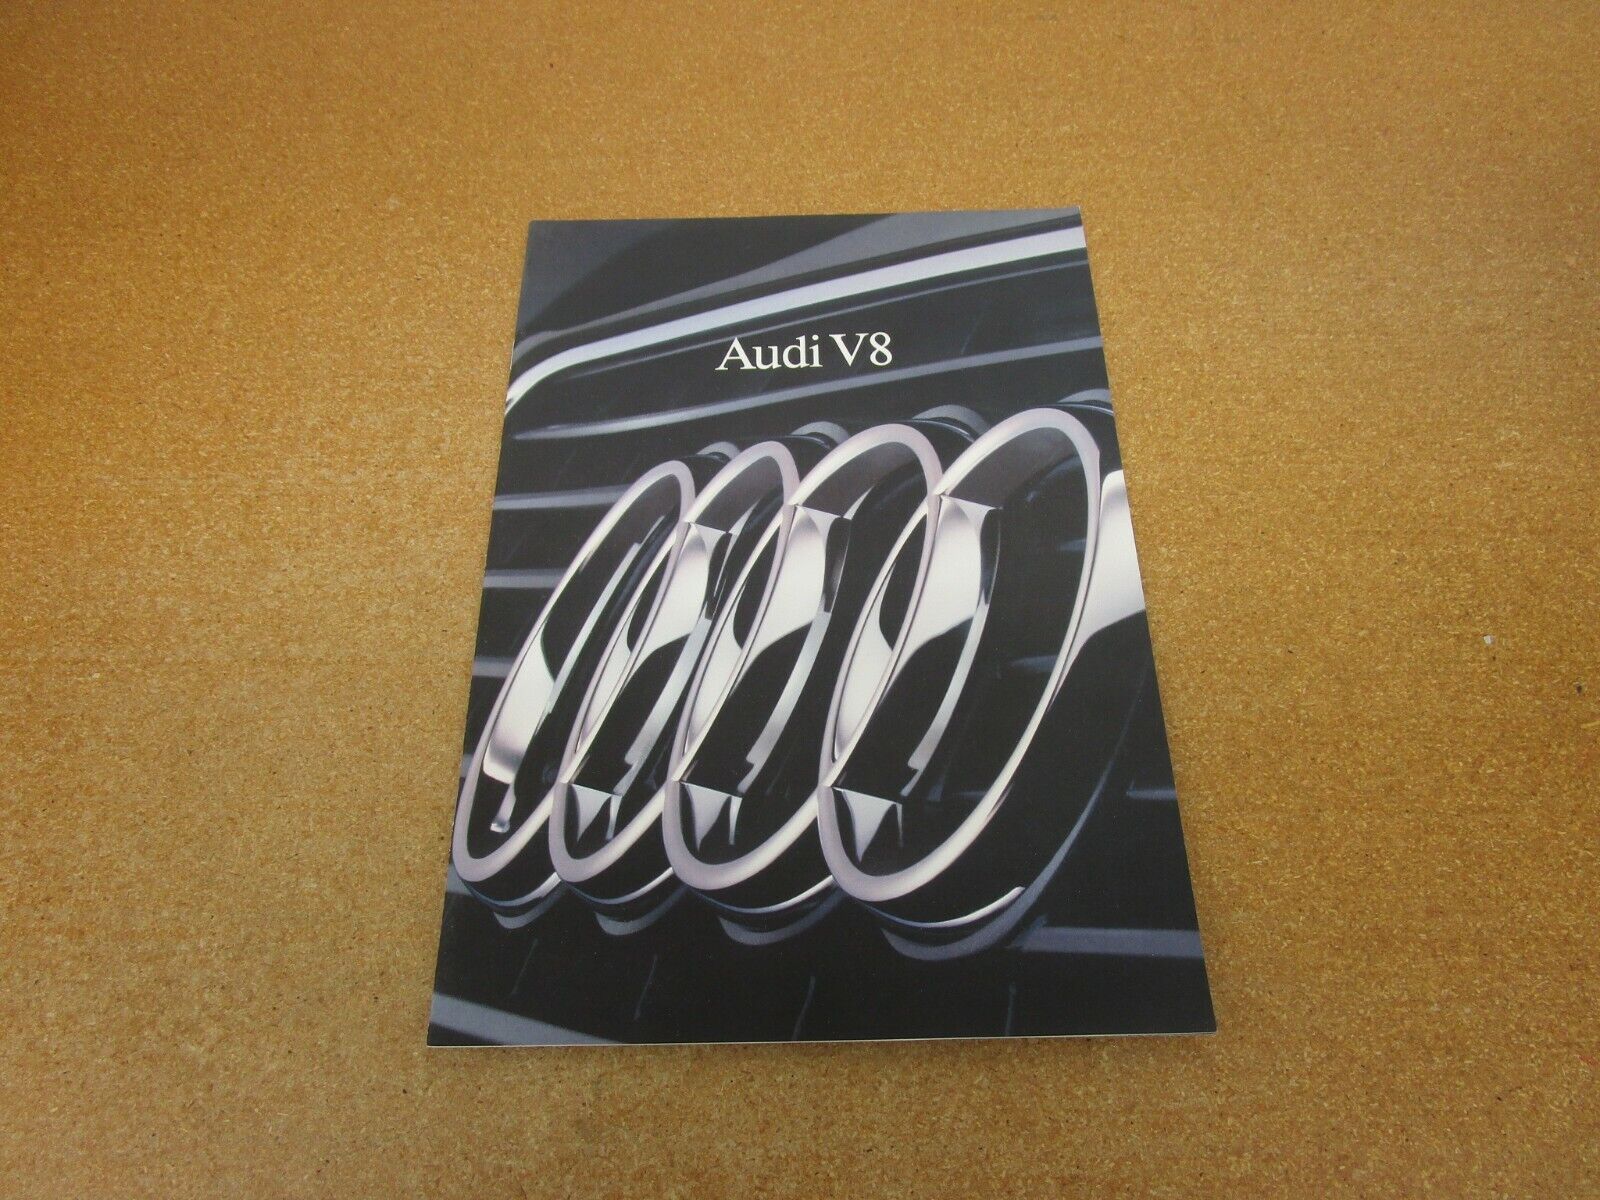 1989 Audi V8 sedan early intro preview sales brochure 12 page literature